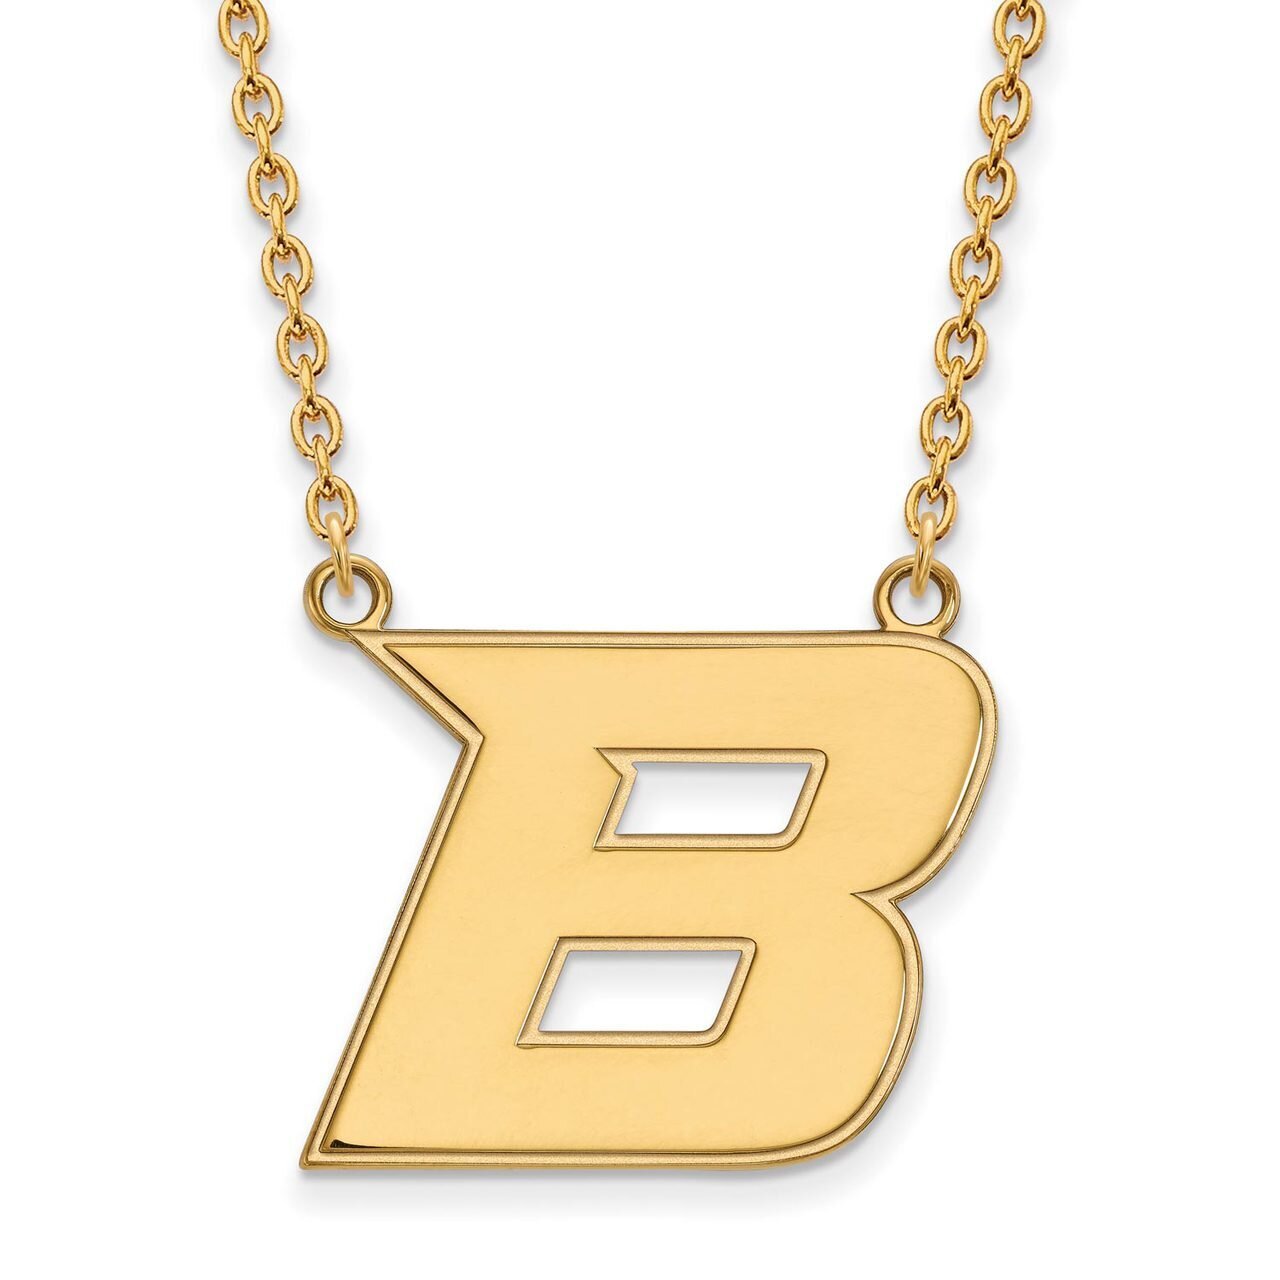 Boise State University Large Pendant with Chain Necklace 14k Yellow Gold 4Y008BOS-18